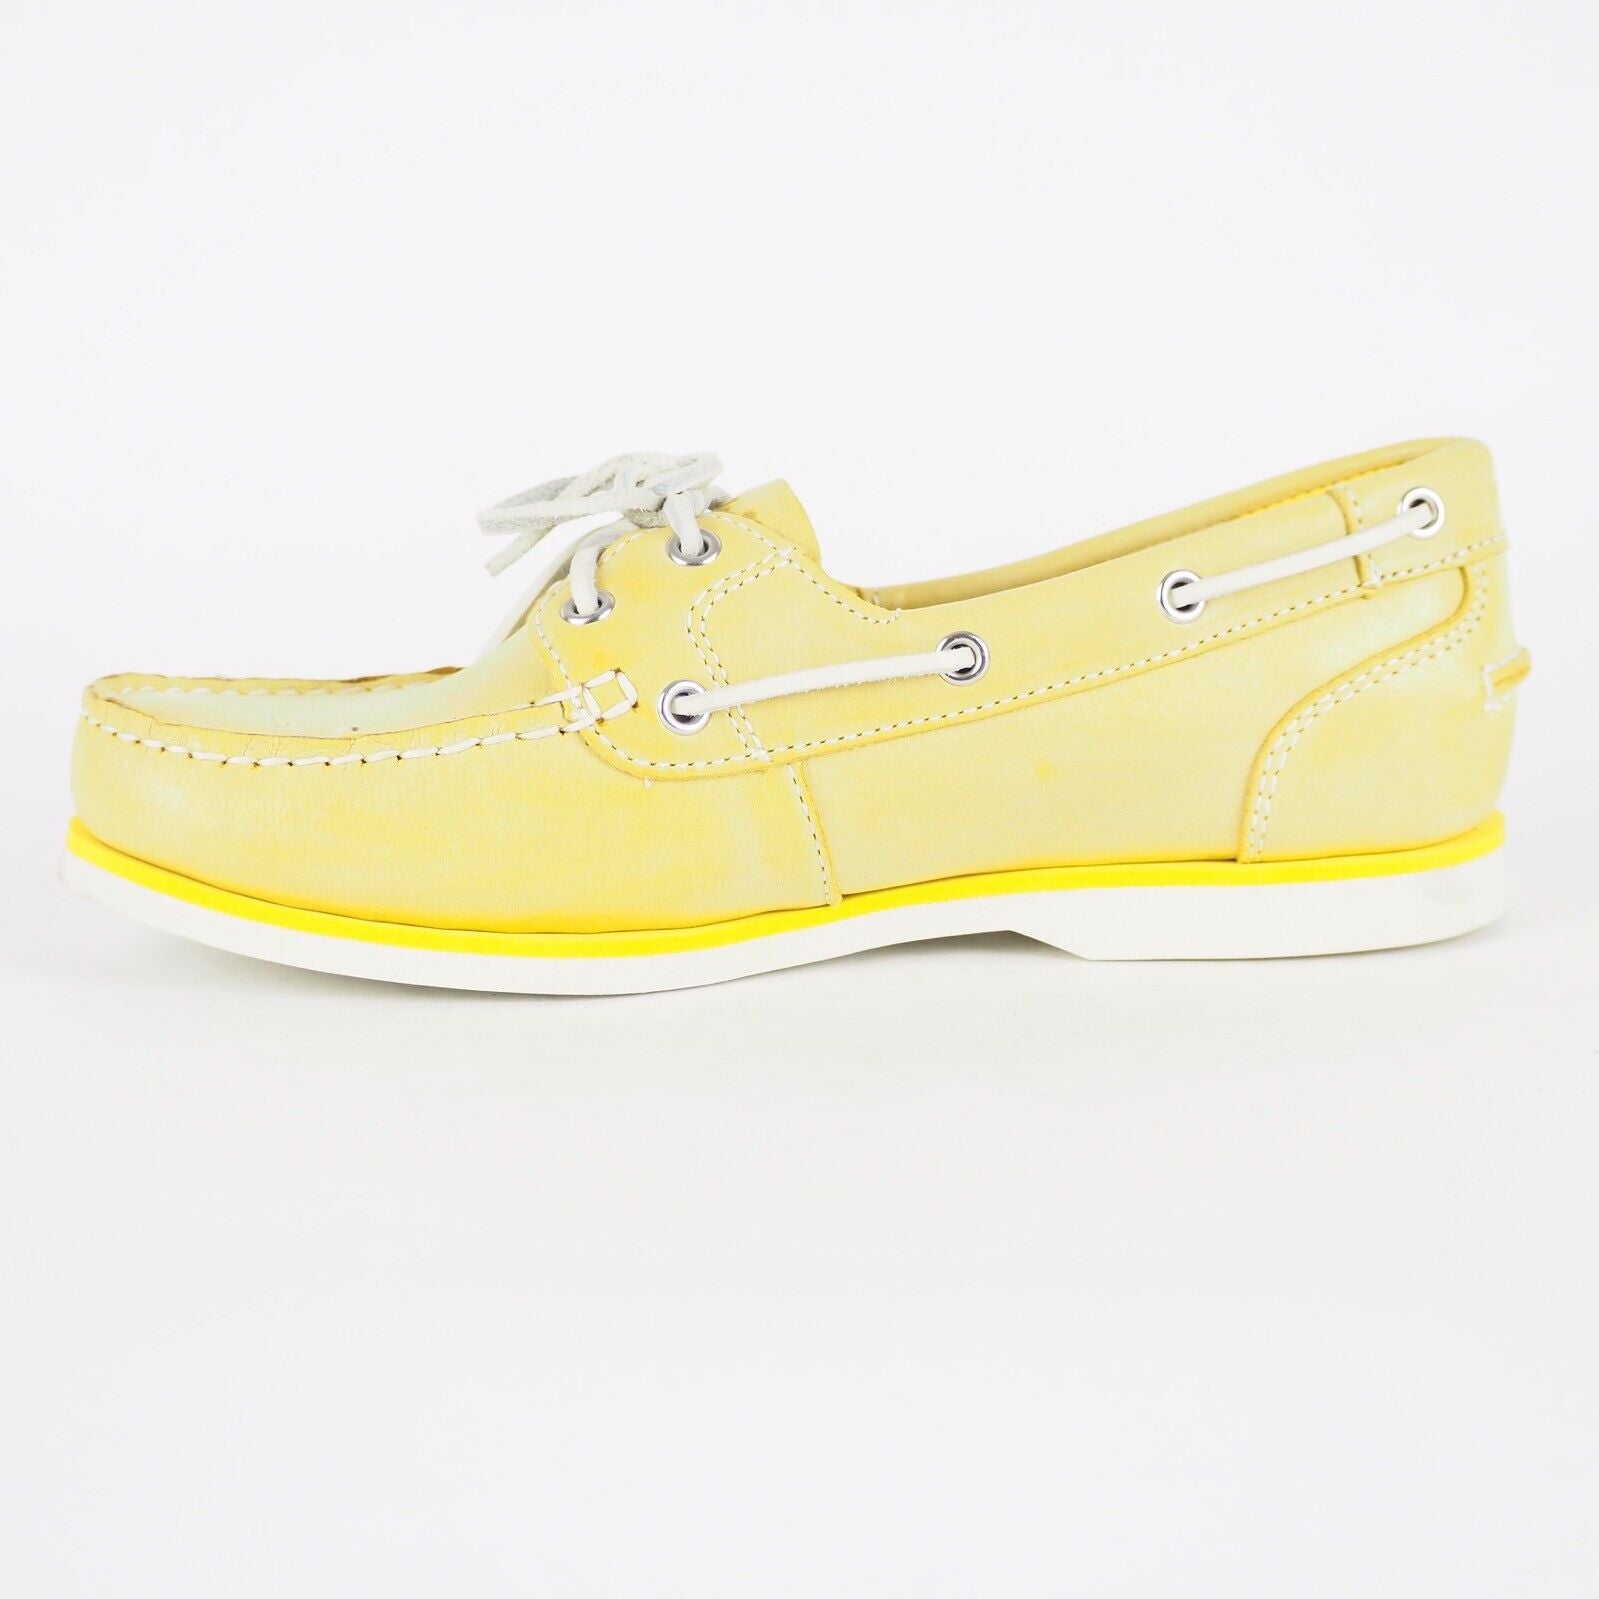 Womens Timberland Classic 2 Eye Unlined A14QA Yellow Leather Boat Shoes